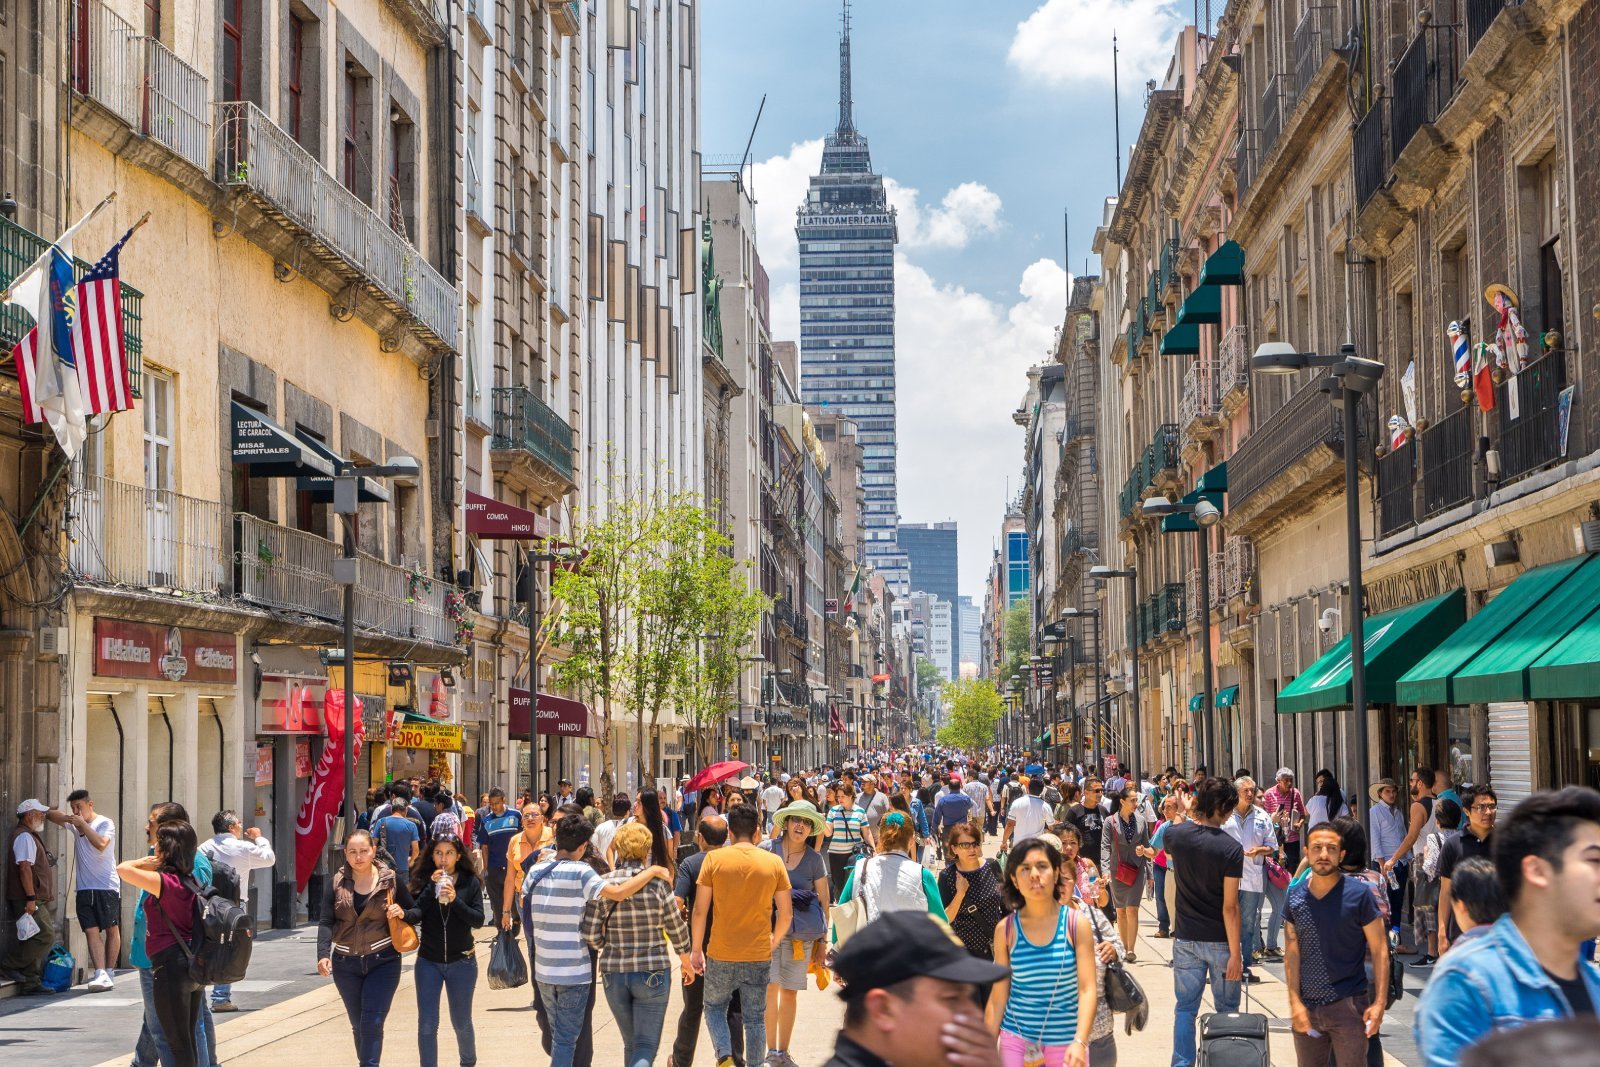 <p class="wp-caption-text">Image Credit: Shutterstock / Alex Cimbal</p>  <p>While American dollars are welcomed in resort areas, there’s a broader conversation about the lack of engagement with the real Mexico beyond the all-inclusives.</p>